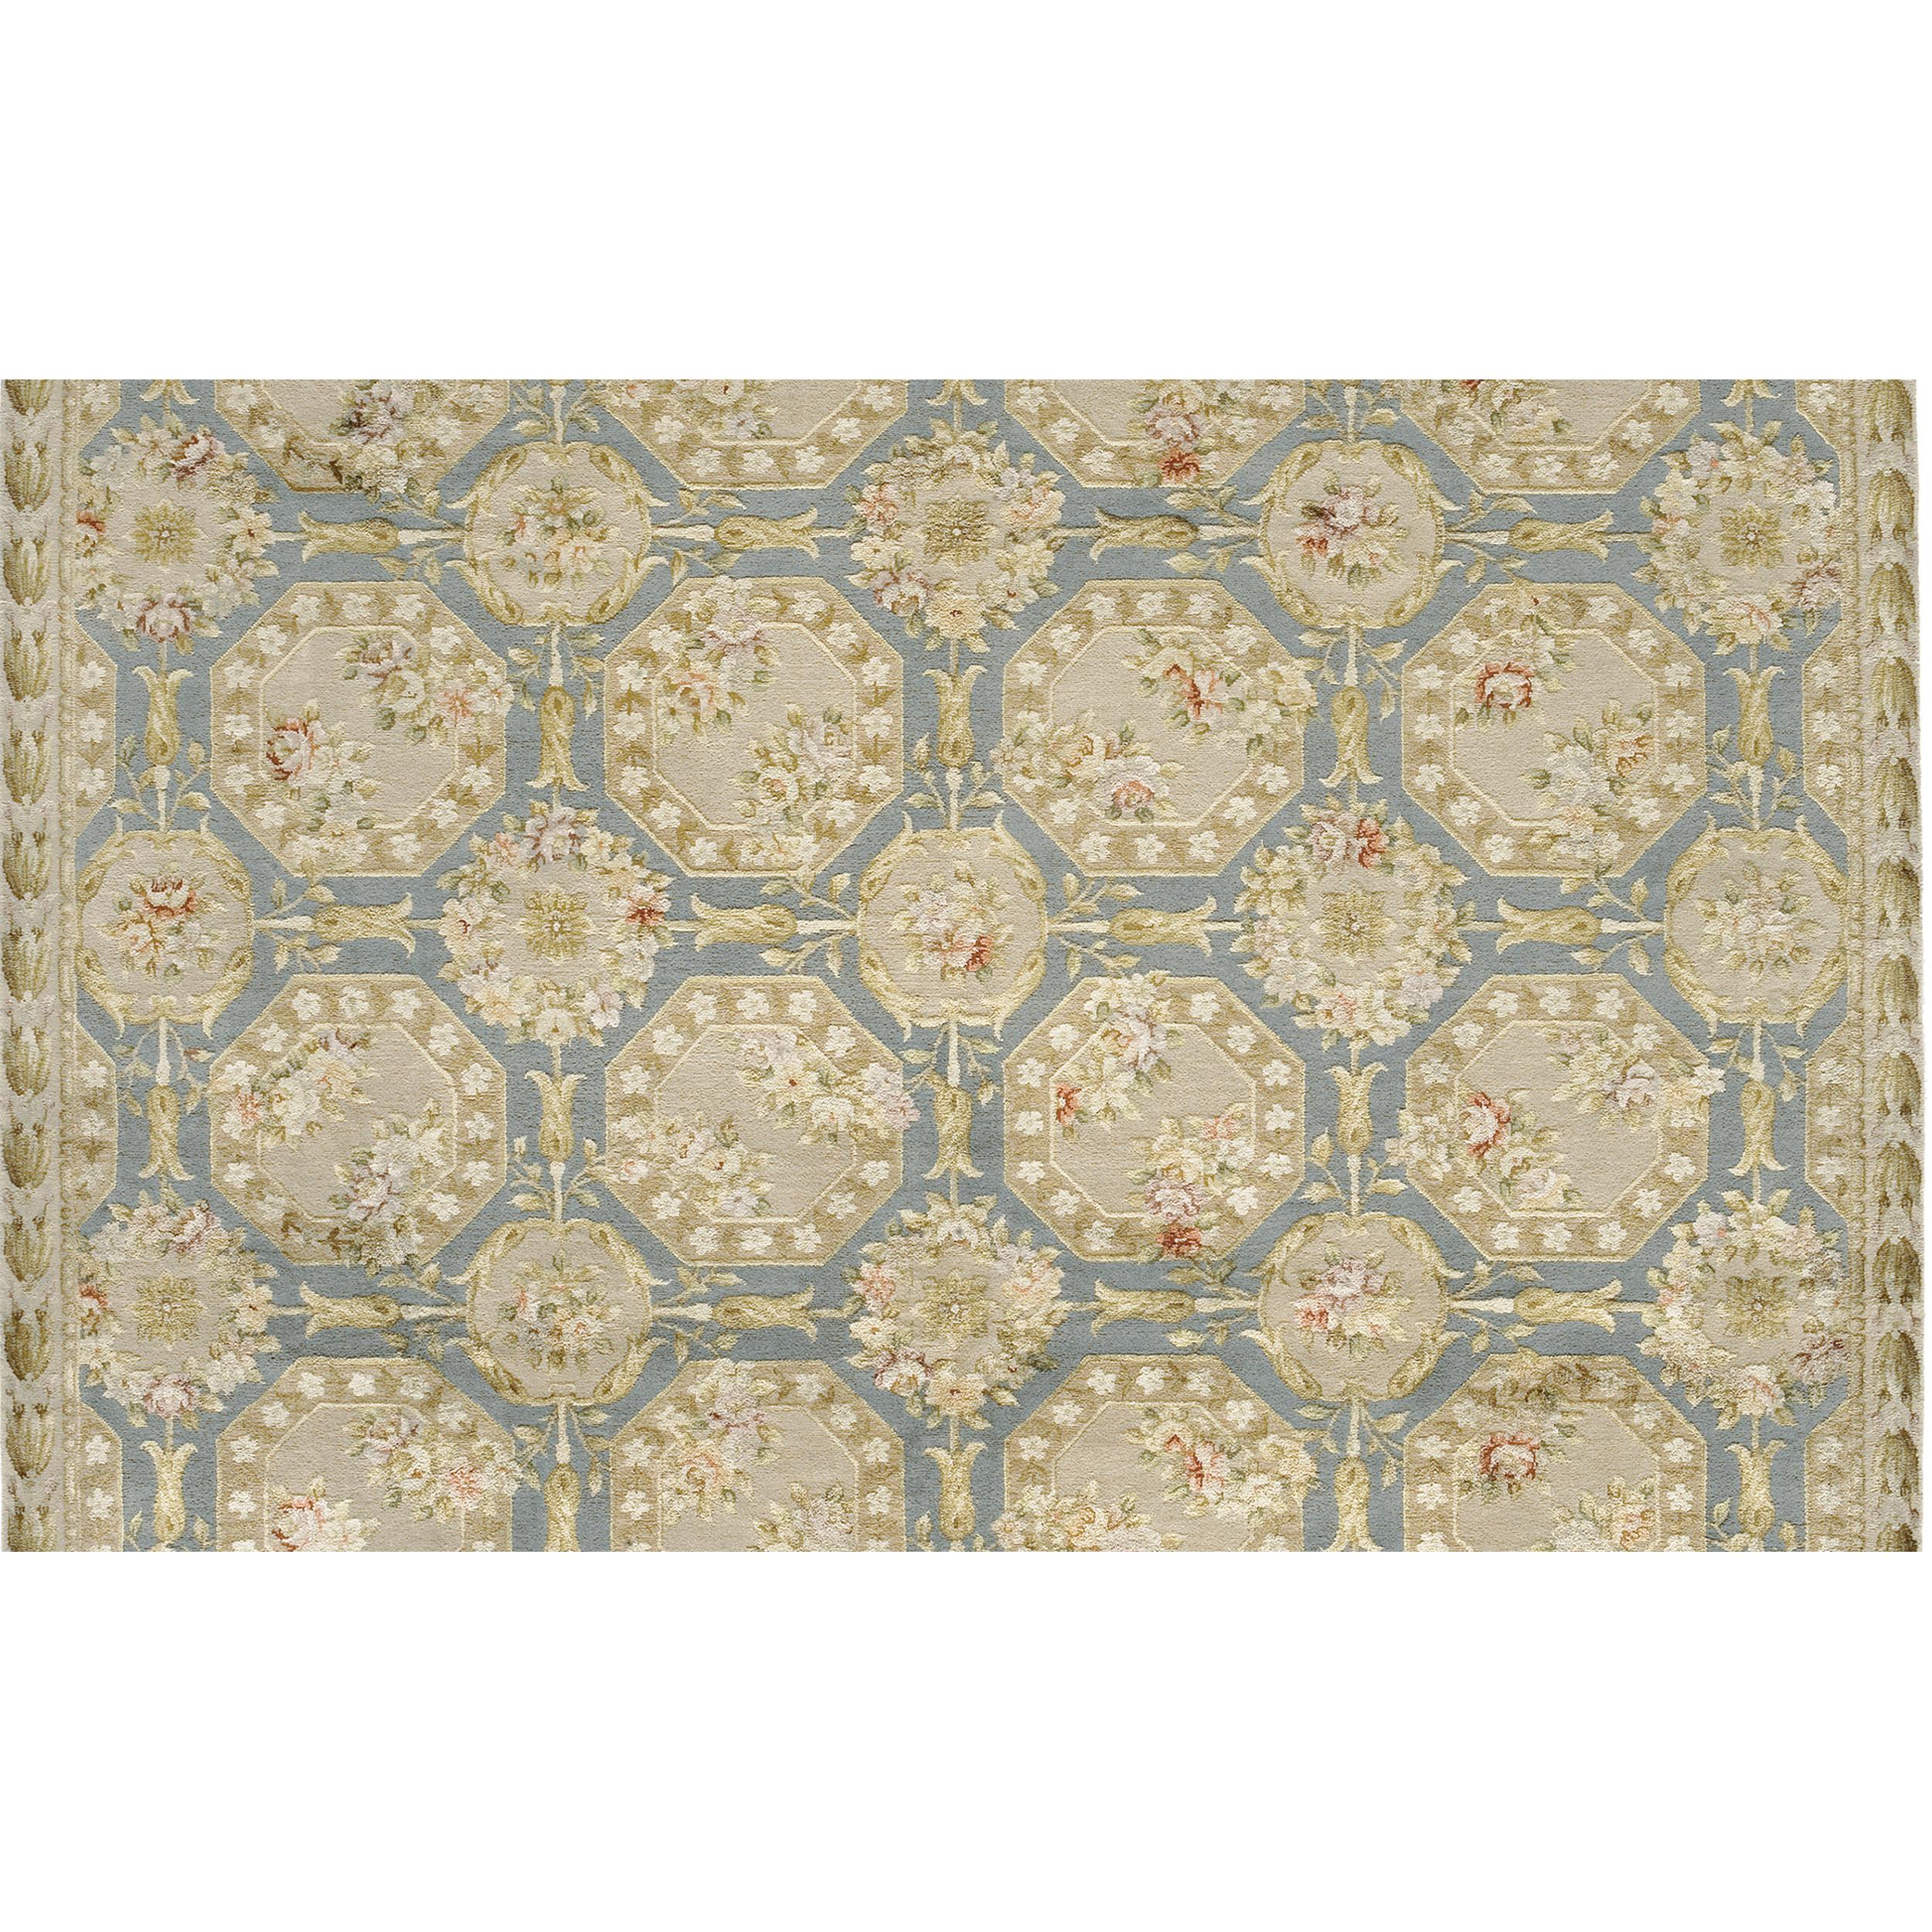 Chinese Luxury European Hand-Knotted Fairfax Sterling & Cream 12x15 Rug For Sale